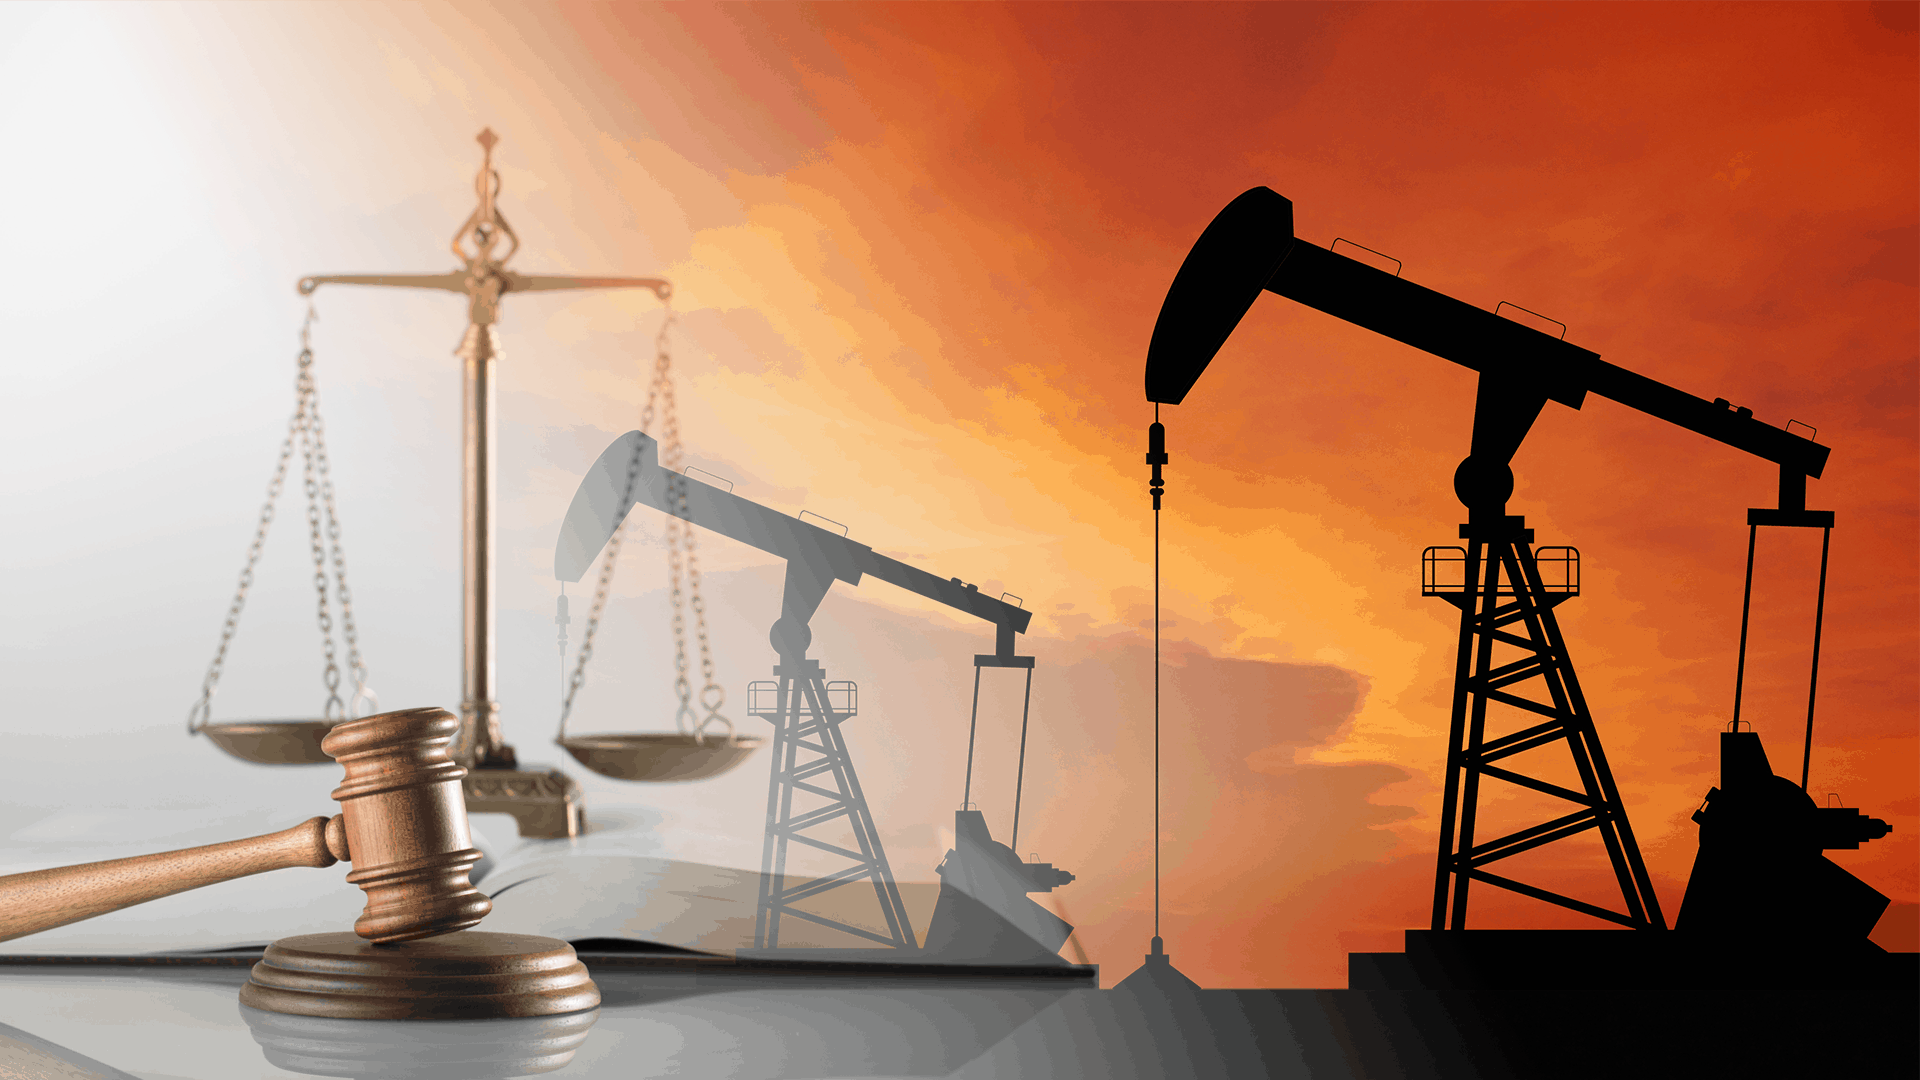 Principles of Oil and Gas Law